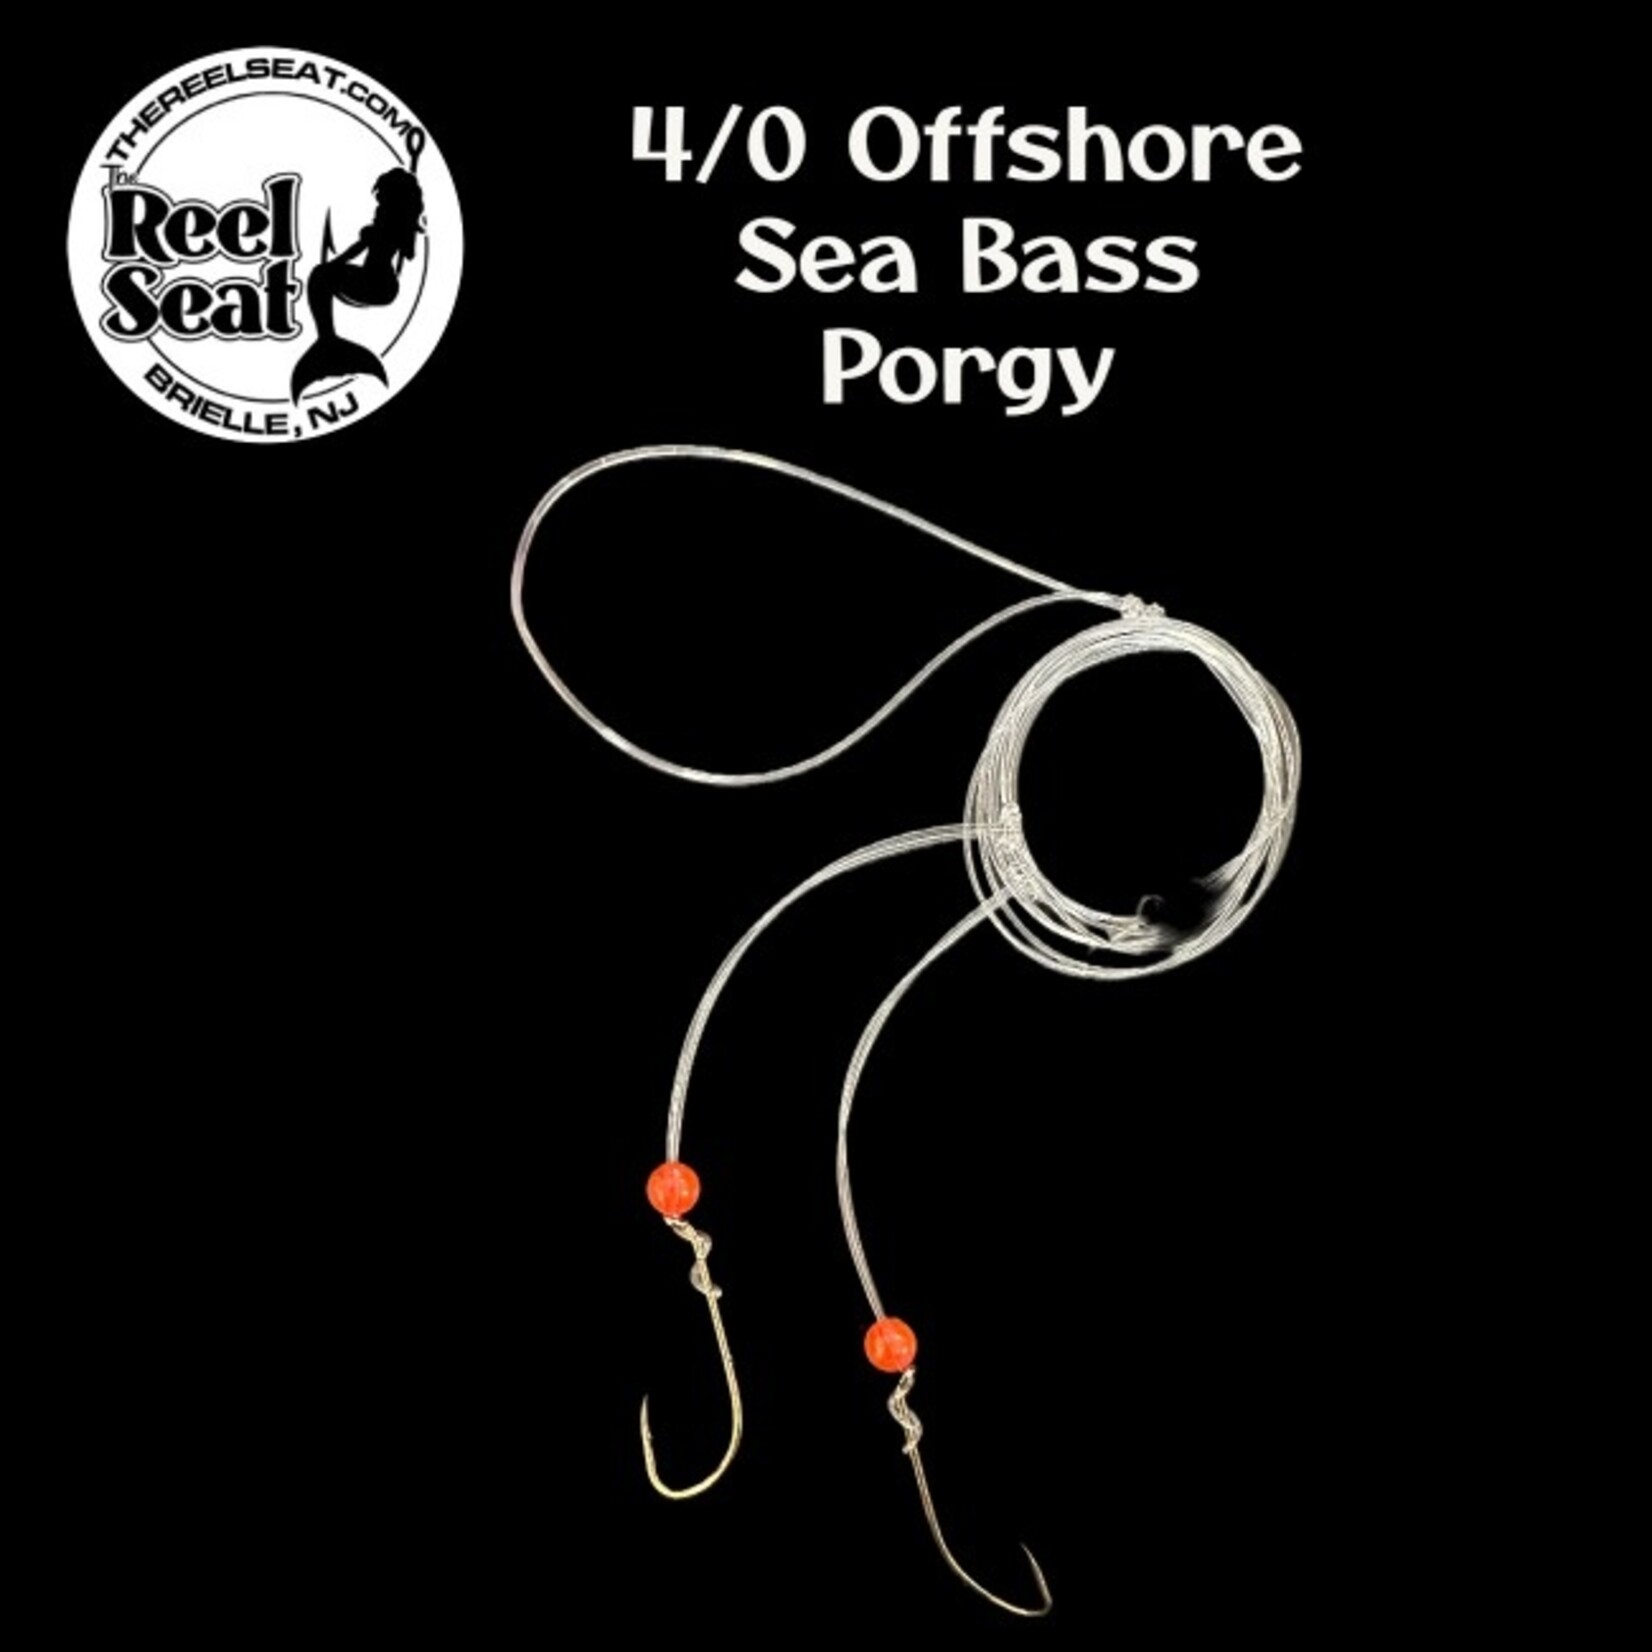 The Reel Seat RS 4/0 Offshore Sea Bass/ Porgy